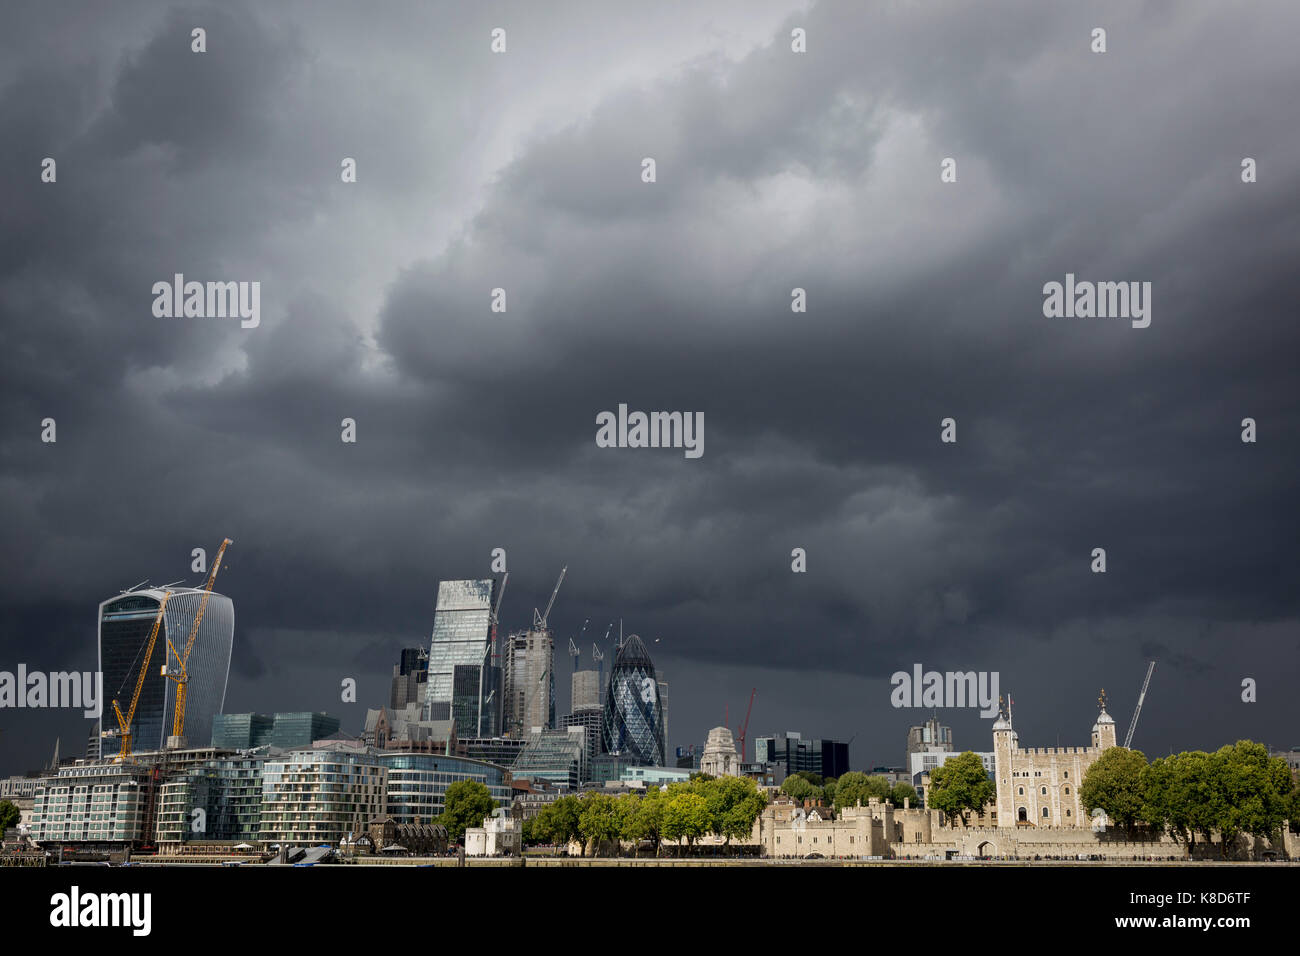 Storm clouds gather and dark times are ahead for the modern City of London (with the Norman-era Tower of London, right), on 14th September 2017, in London, England. The City is the historical financial district founded by the Romans in the 1st Century but faces a post-Brexit financial uncertainty. Stock Photo